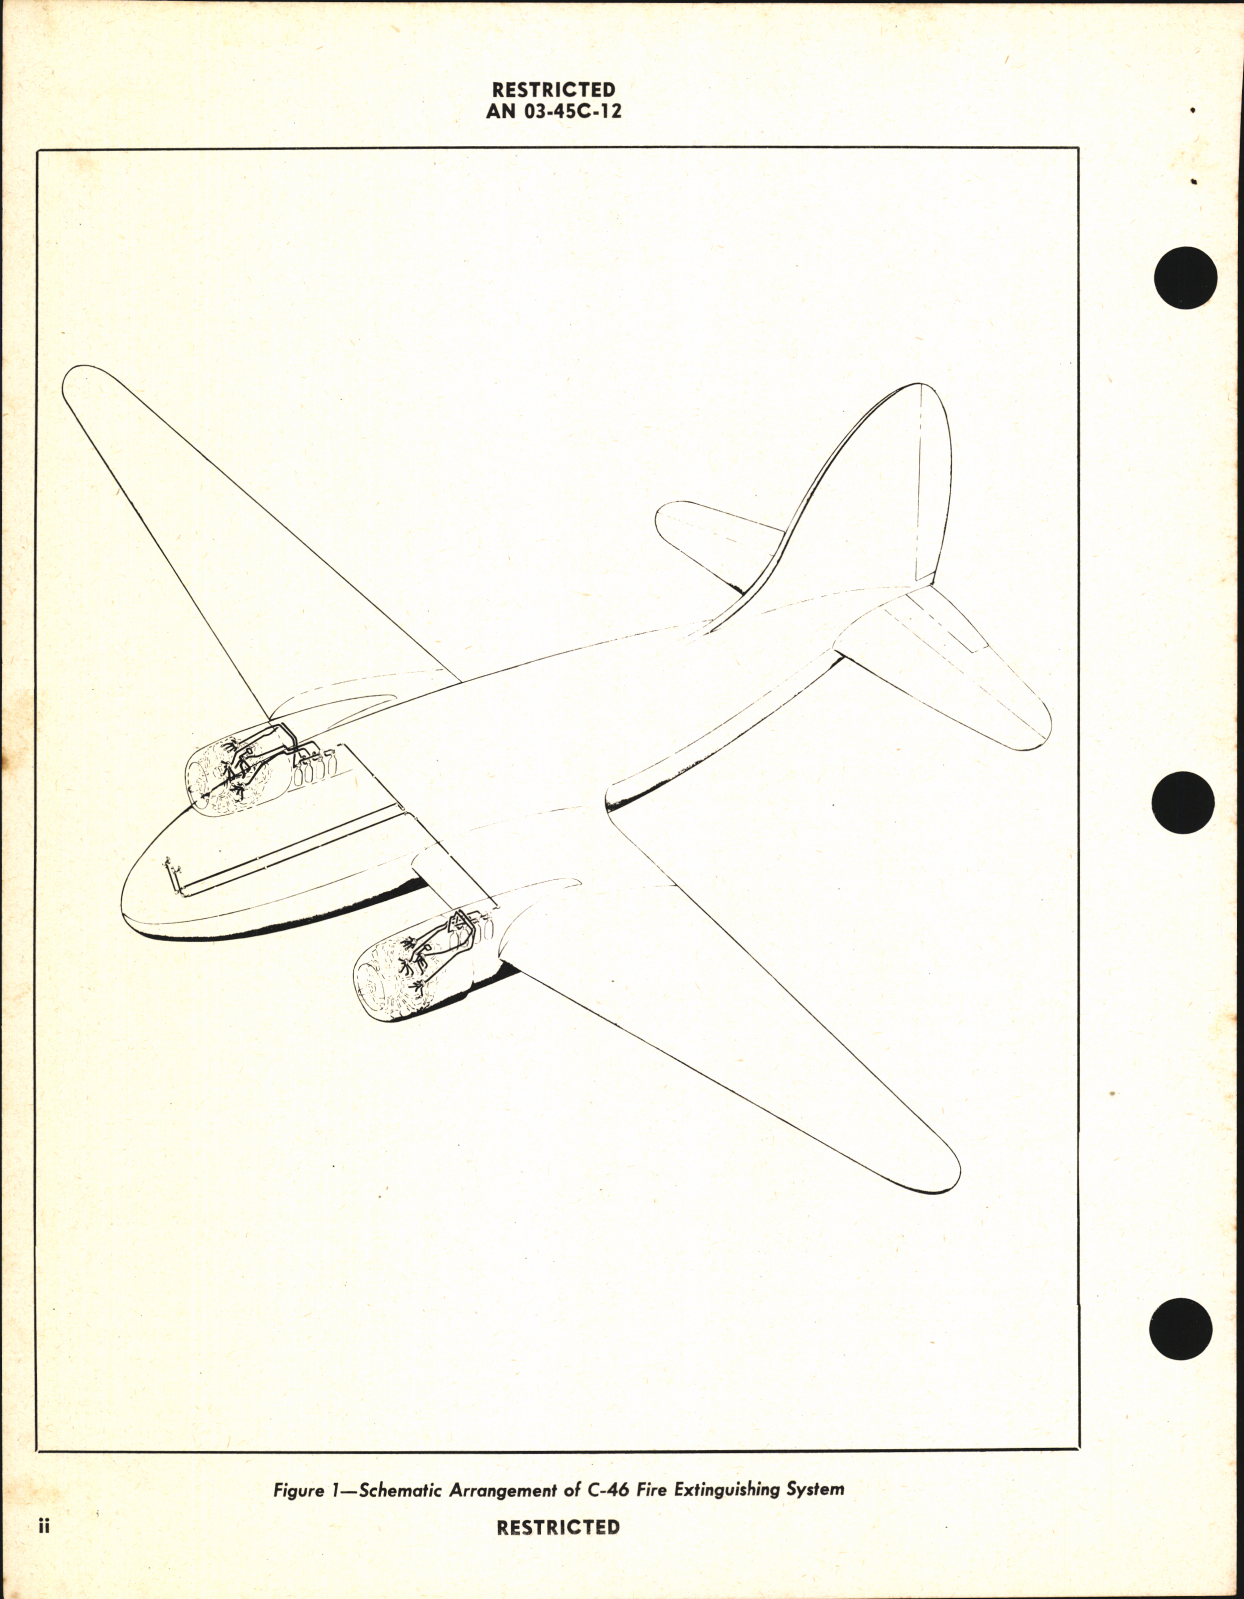 Sample page 4 from AirCorps Library document: Handbook of Instructions with Parts Catalog for Type C-46 Fire Extinguisher System